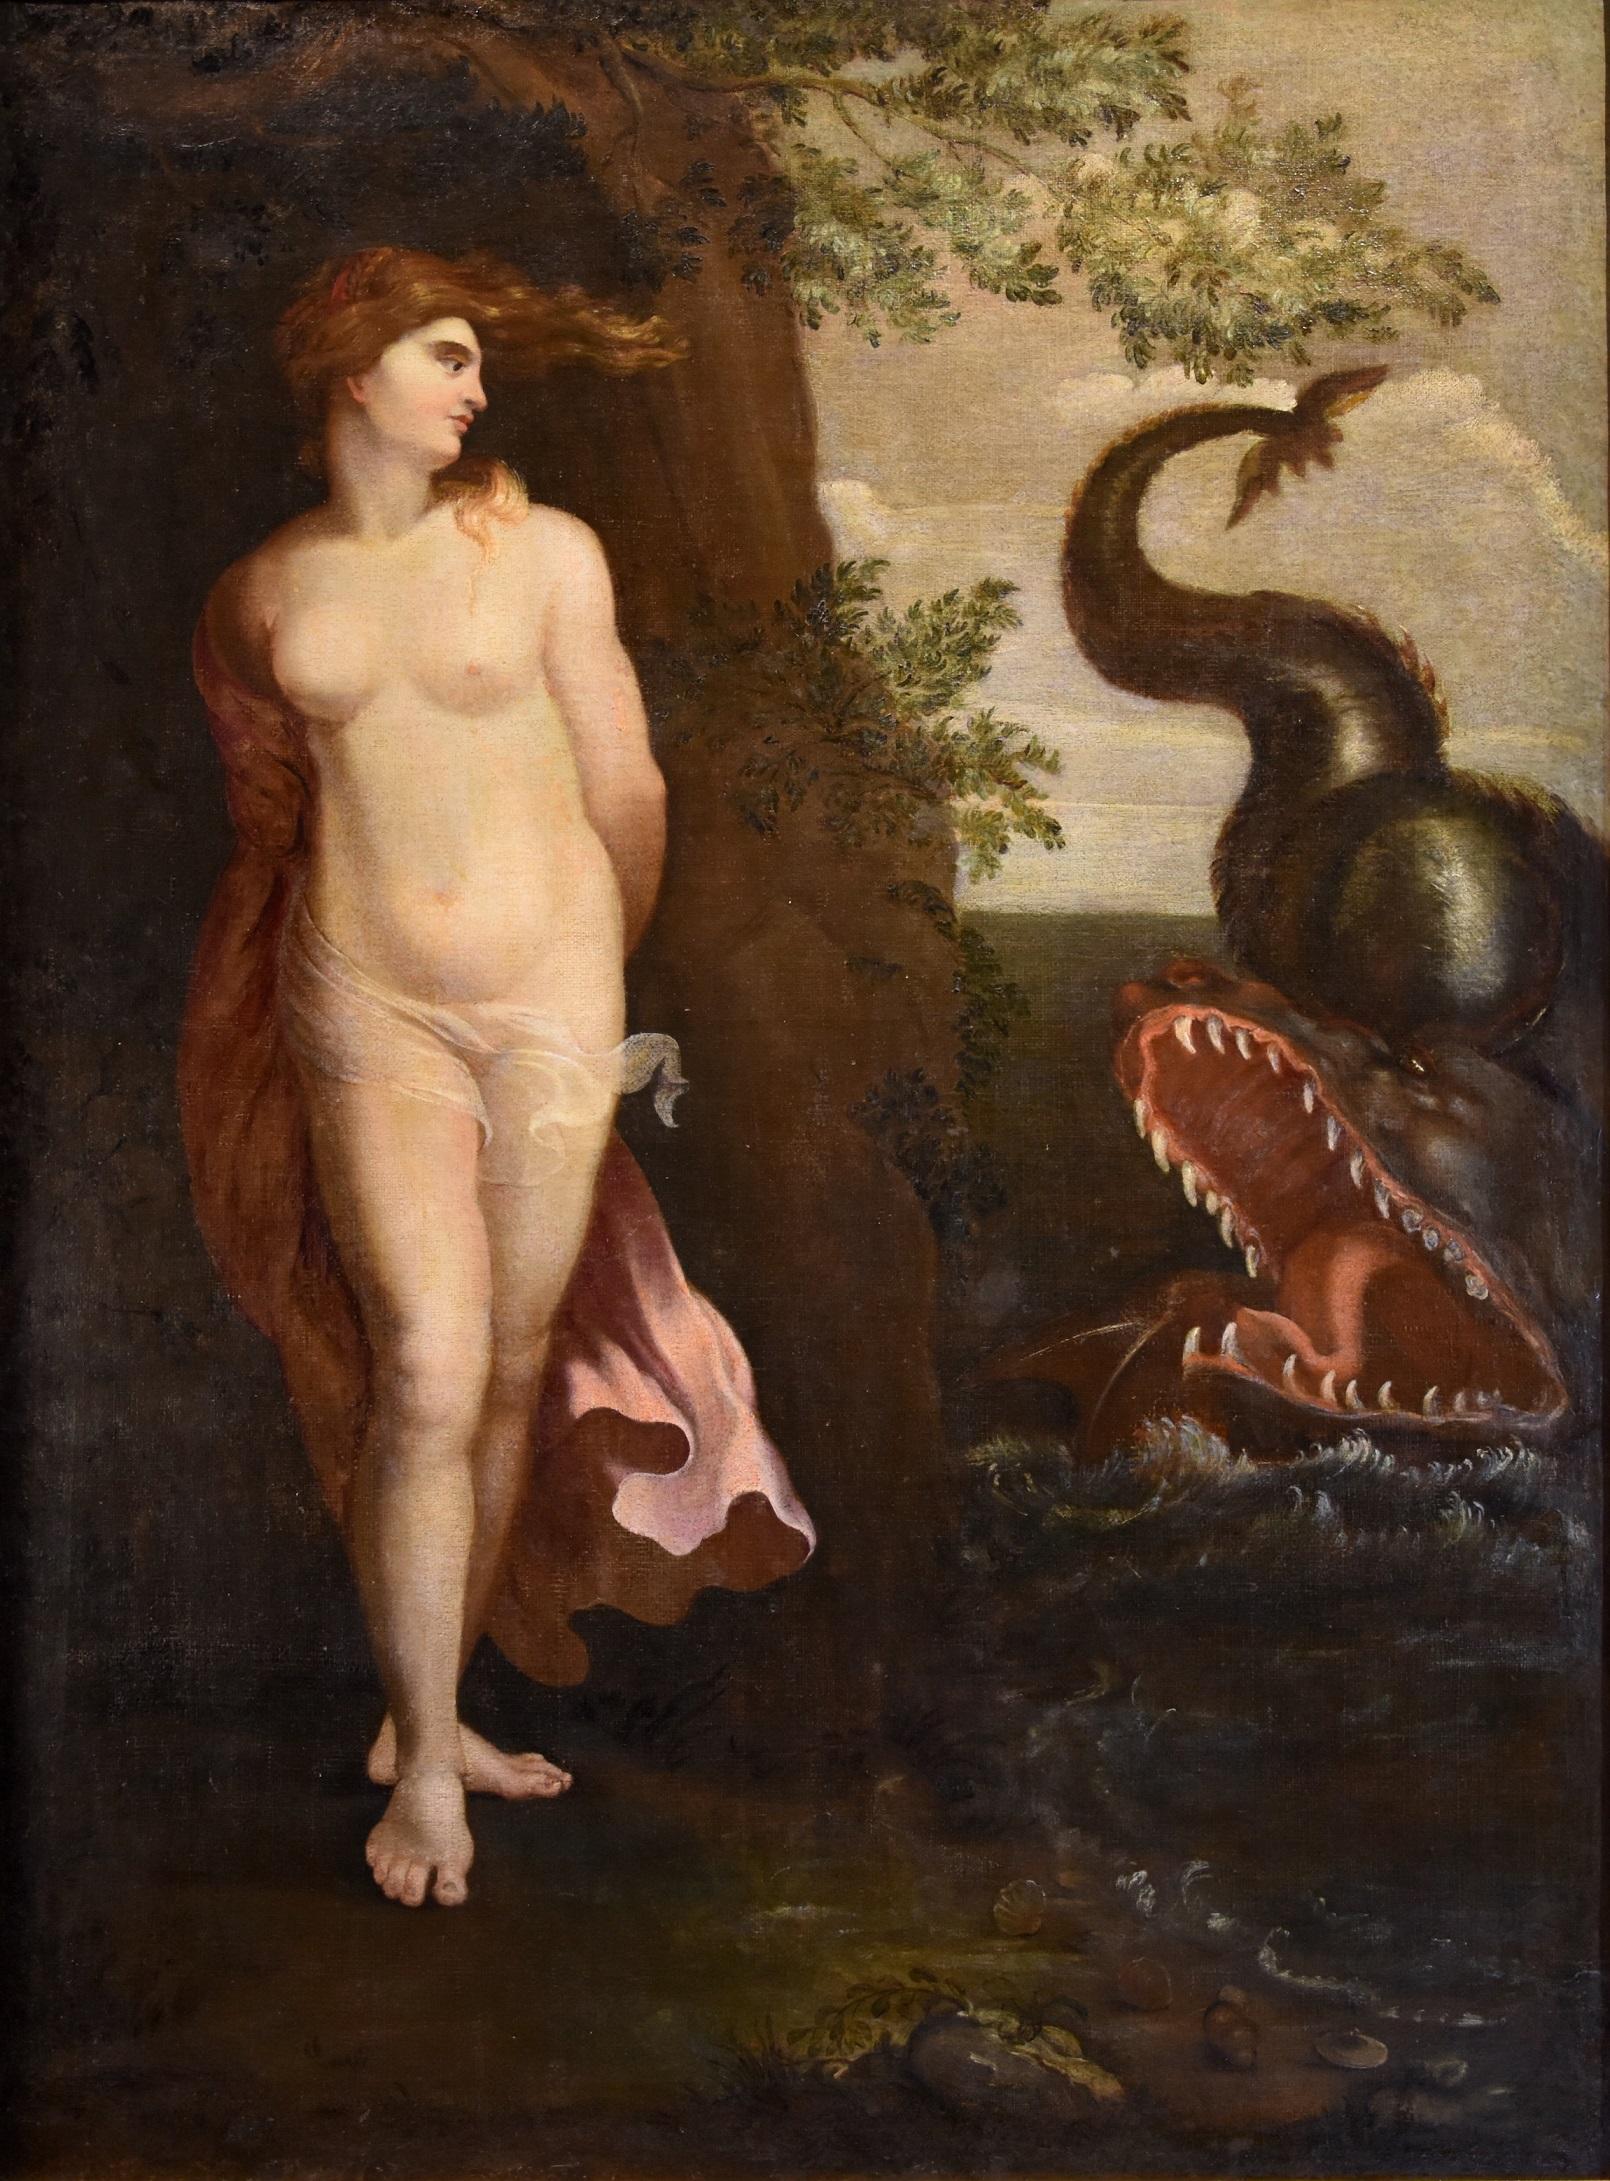 Andromeda Monster Paint Oil on canvas Old master 16/17th Century Roman school - Old Masters Painting by Painter active in Rome